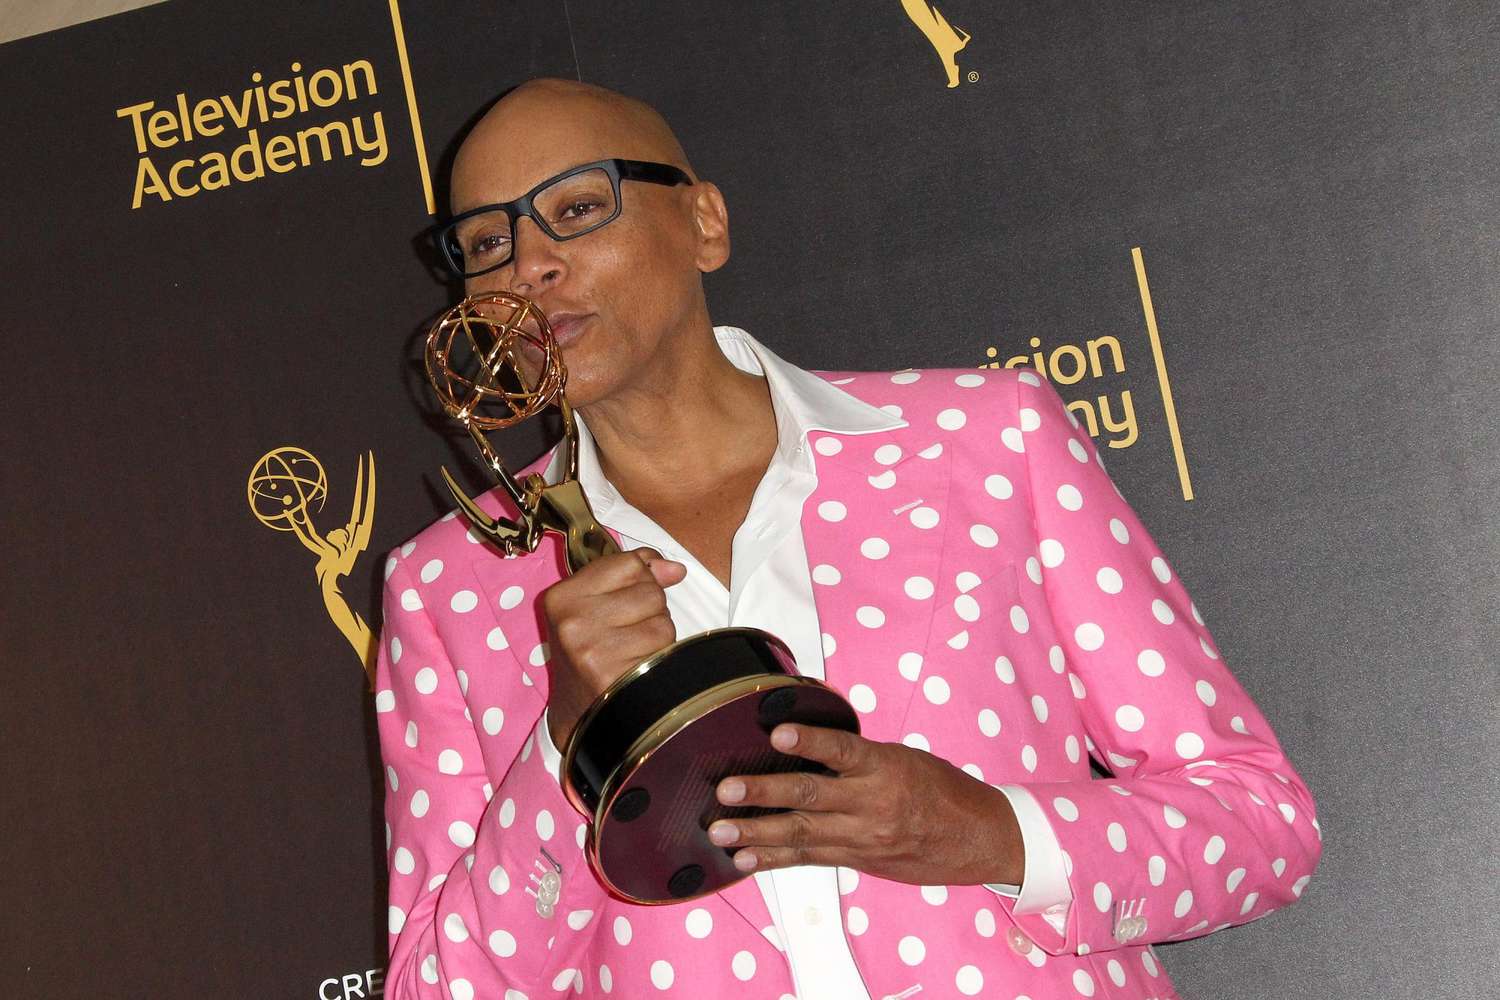 Won his first Emmy for hosting RuPaul's Drag Race in 2016